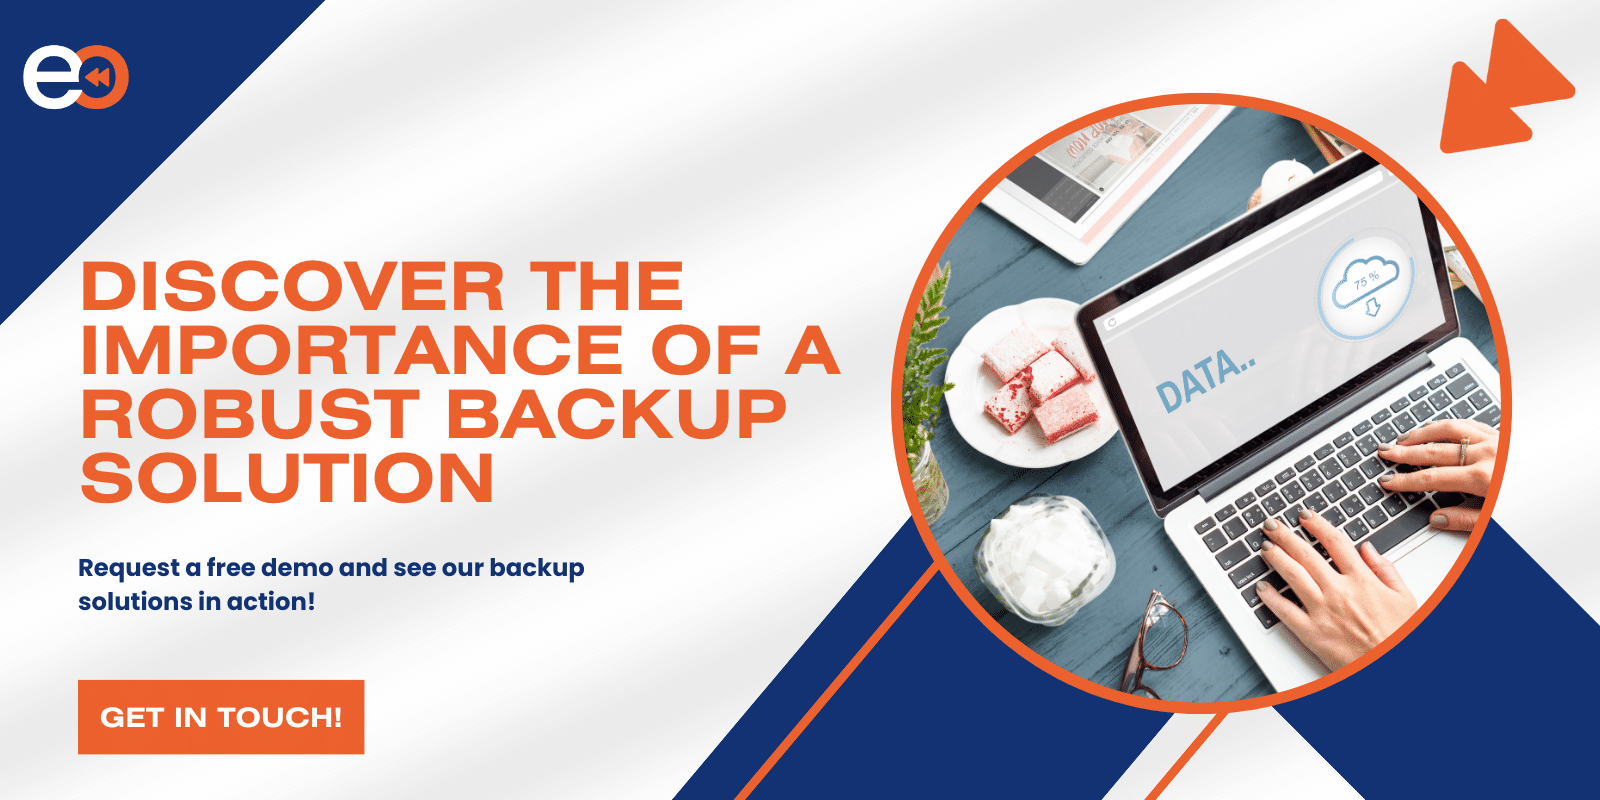 Call-to-action image to discover robust backup services provided by EO Backup. Showcases a laptop displaying a data backup interface, inviting viewers to request a free demo and get in touch.